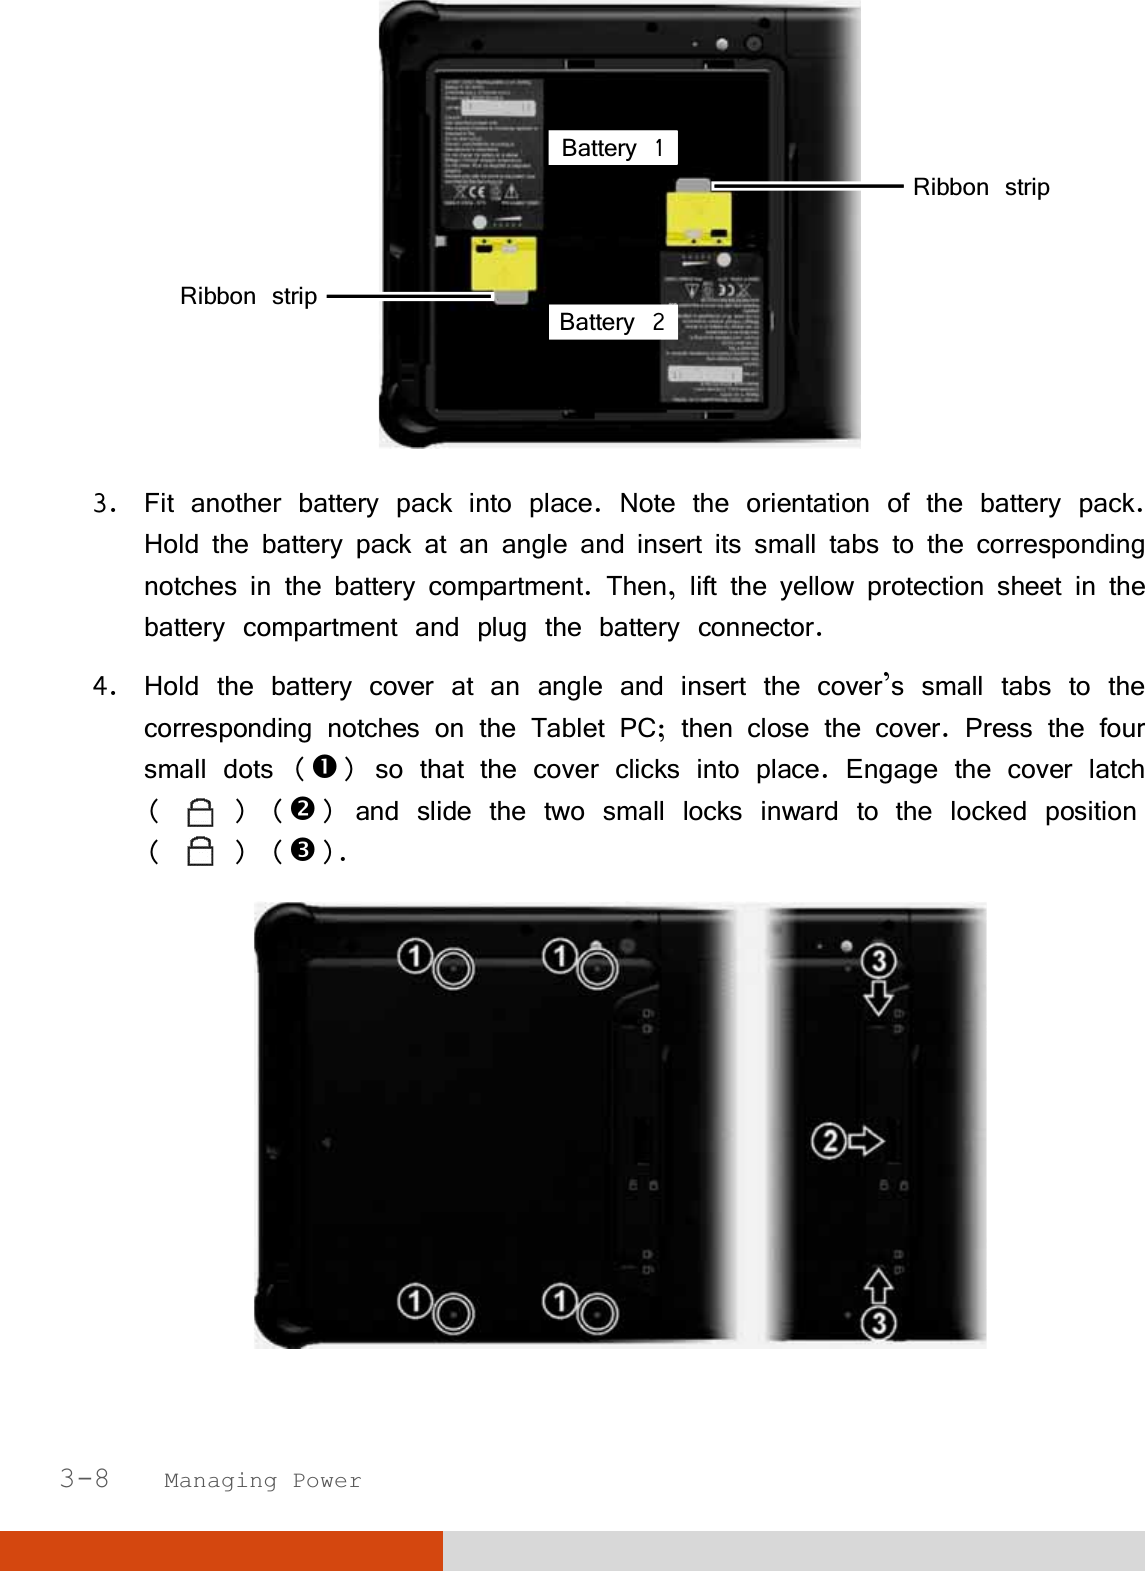  3-8   Managing Power  3. Fit another battery pack into place. Note the orientation of the battery pack. Hold the battery pack at an angle and insert its small tabs to the corresponding notches in the battery compartment. Then, lift the yellow protection sheet in the battery compartment and plug the battery connector. 4. Hold the battery cover at an angle and insert the cover’s small tabs to the corresponding notches on the Tablet PC; then close the cover. Press the four small dots () so that the cover clicks into place. Engage the cover latch (   ) () and slide the two small locks inward to the locked position (   ) ().  Ribbon stripRibbon strip Battery 1 Battery 2 